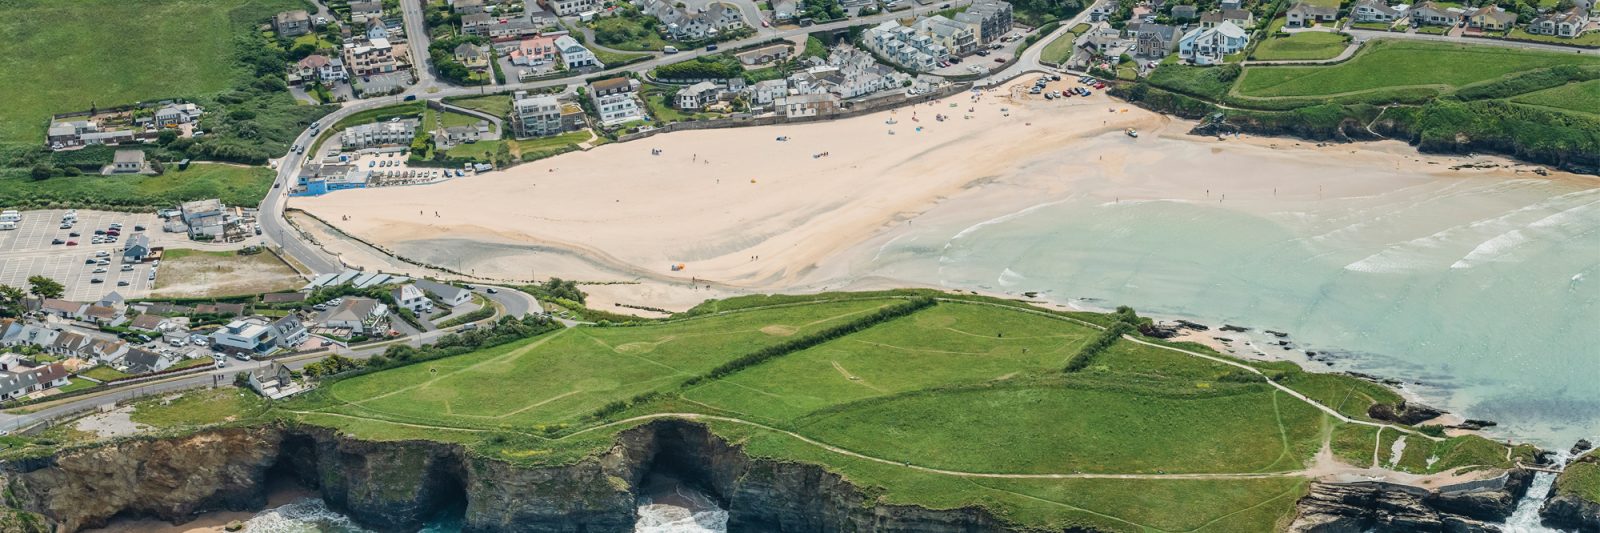 Drone photo of Porth in Newquay, Cornwall